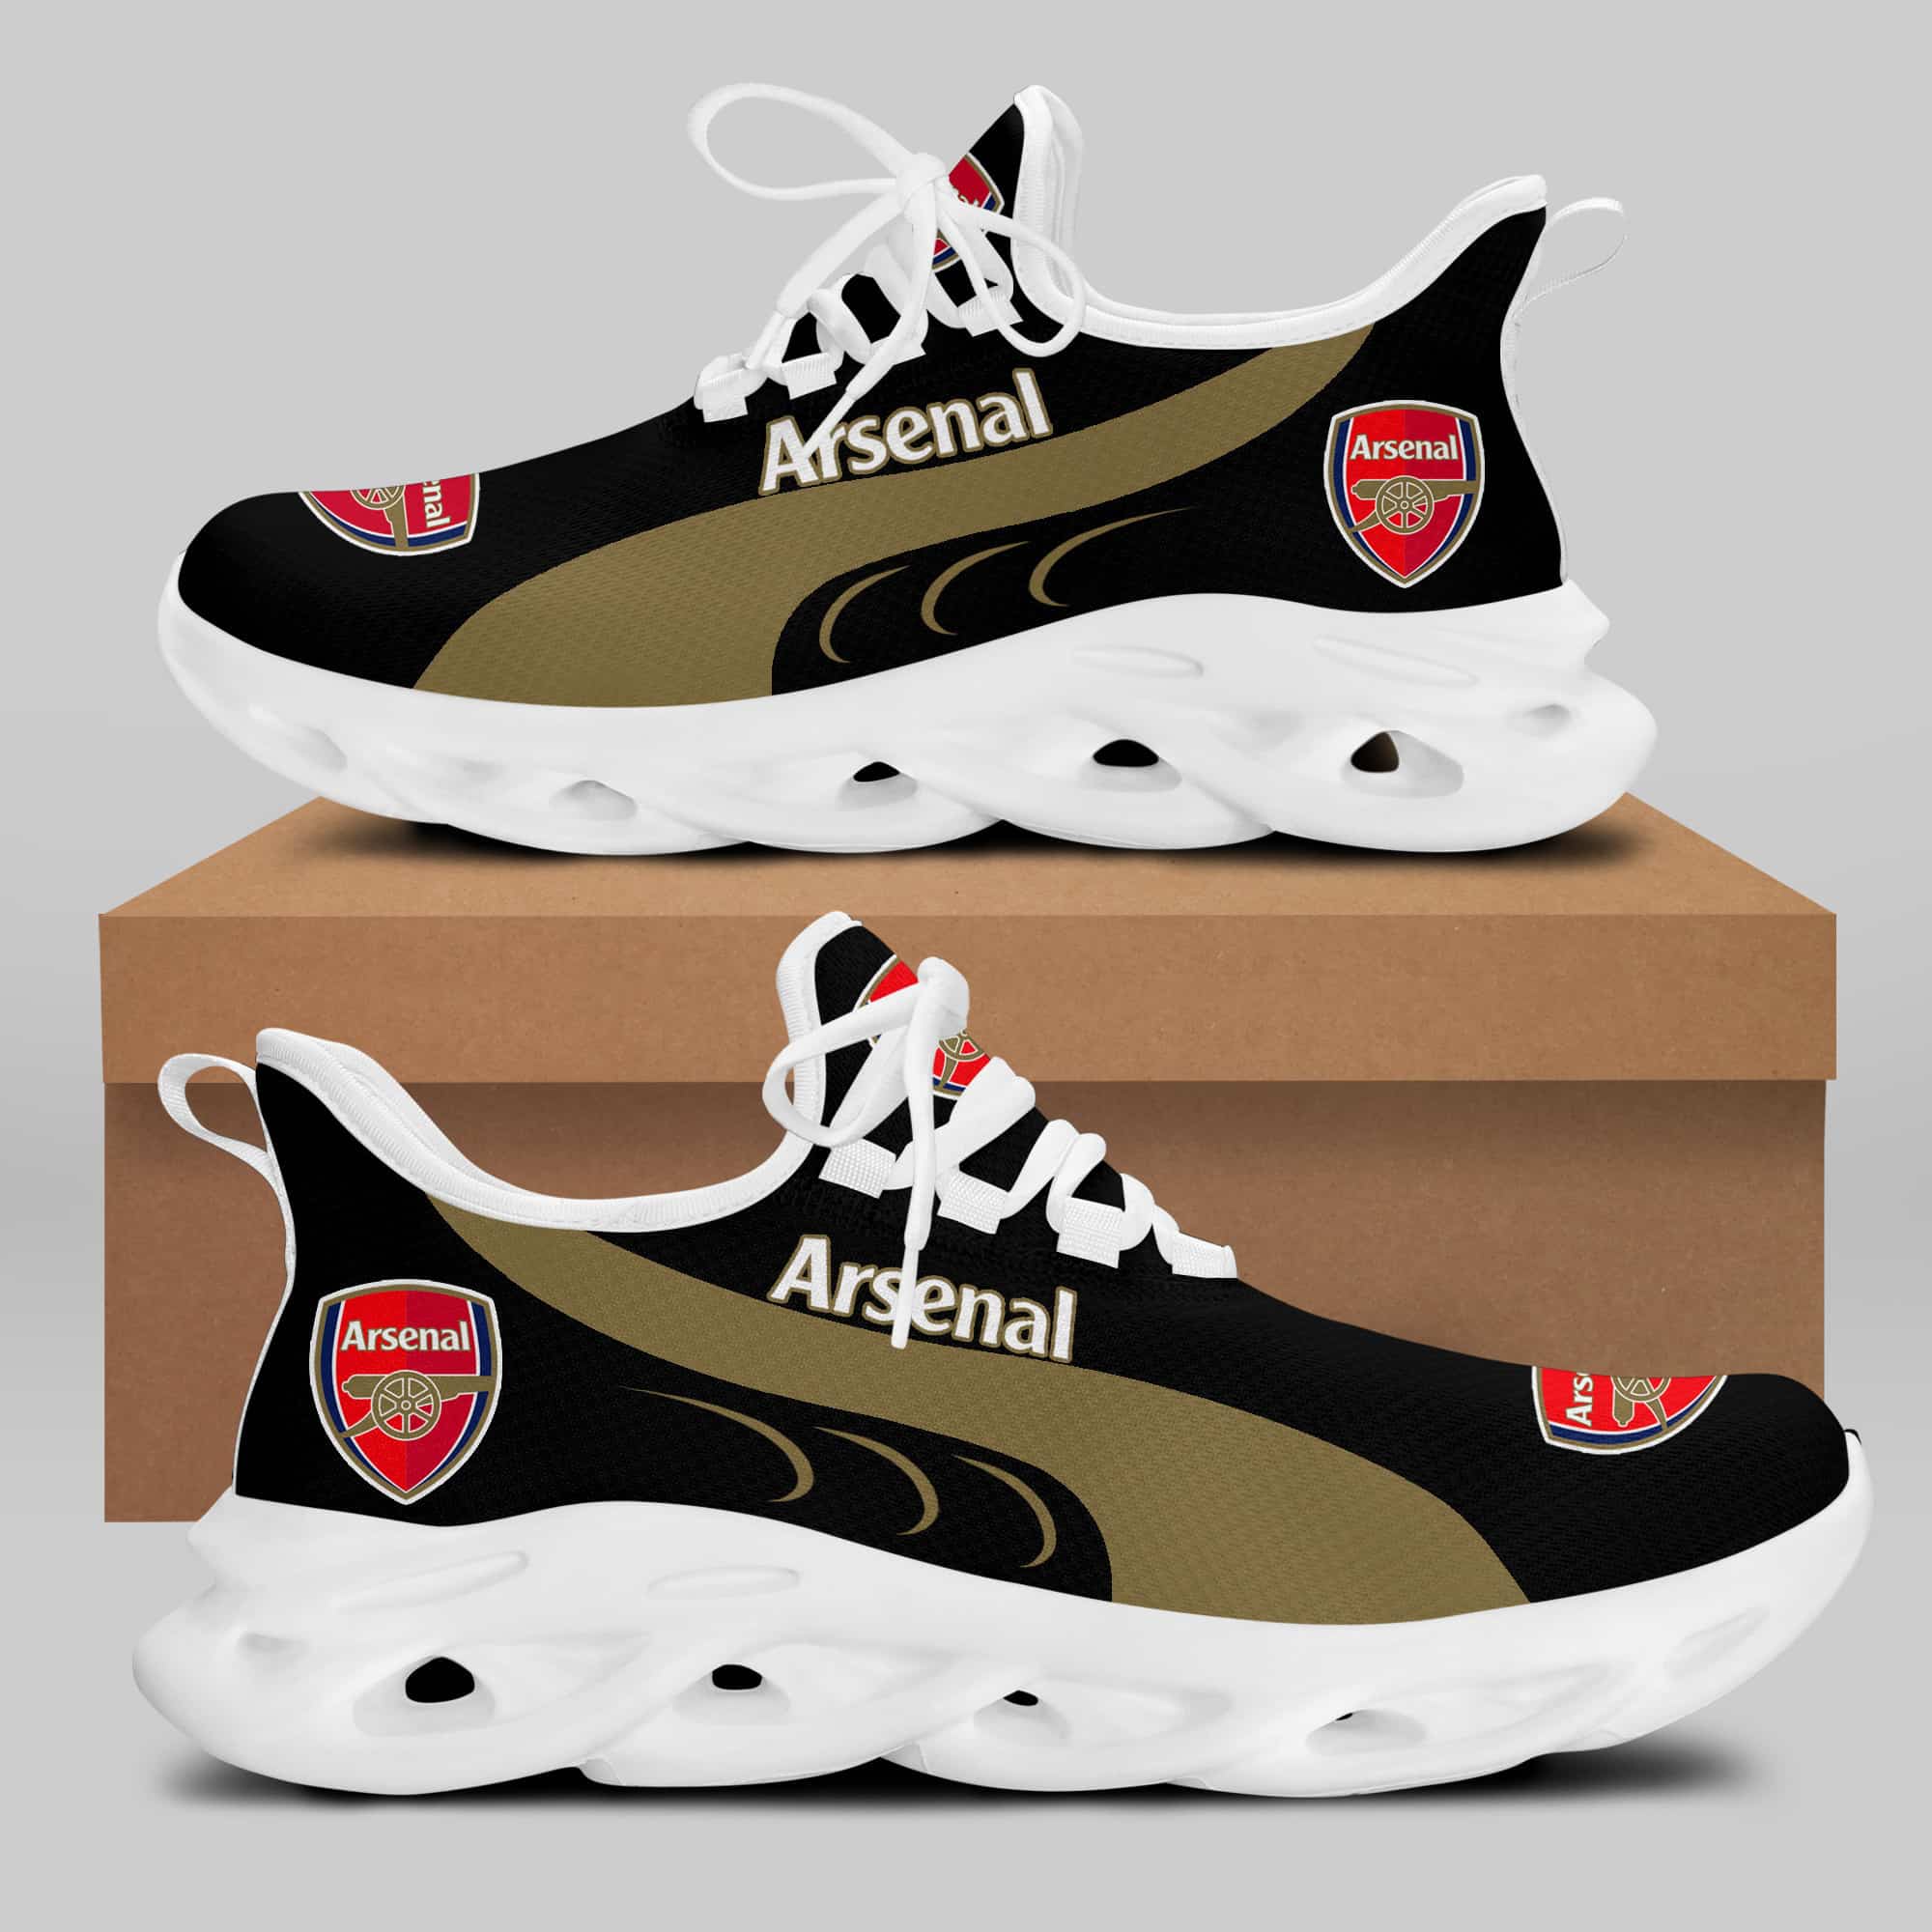 Arsenal Running Shoes Max Soul Shoes Sneakers Ver 3 2